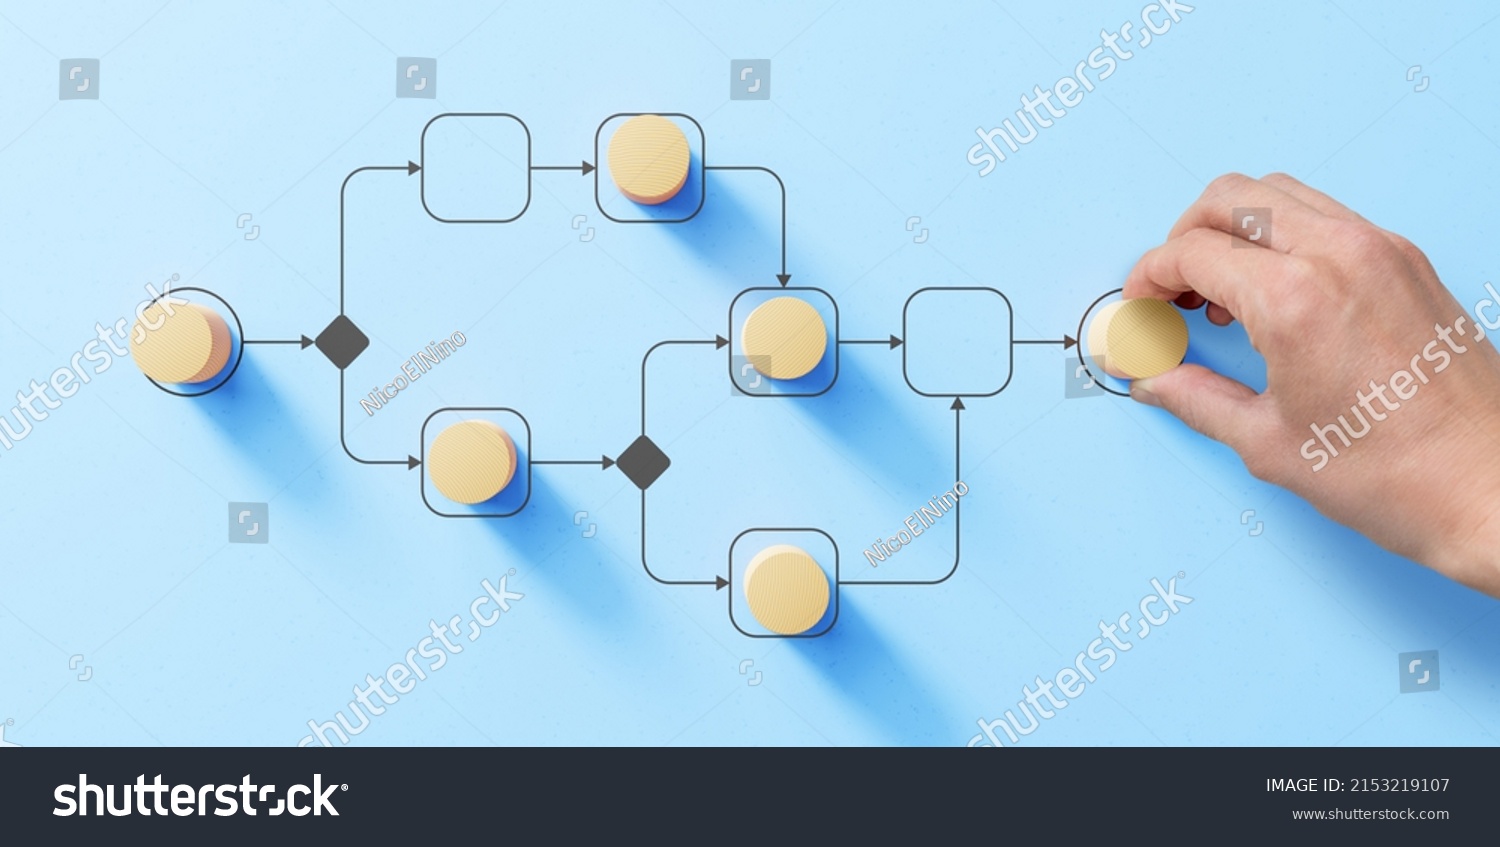 Business process management and automation concept with person moving wooden pieces on flowchart diagram. Workflow implementation to improve productivity and efficiency. Management and organization. #2153219107